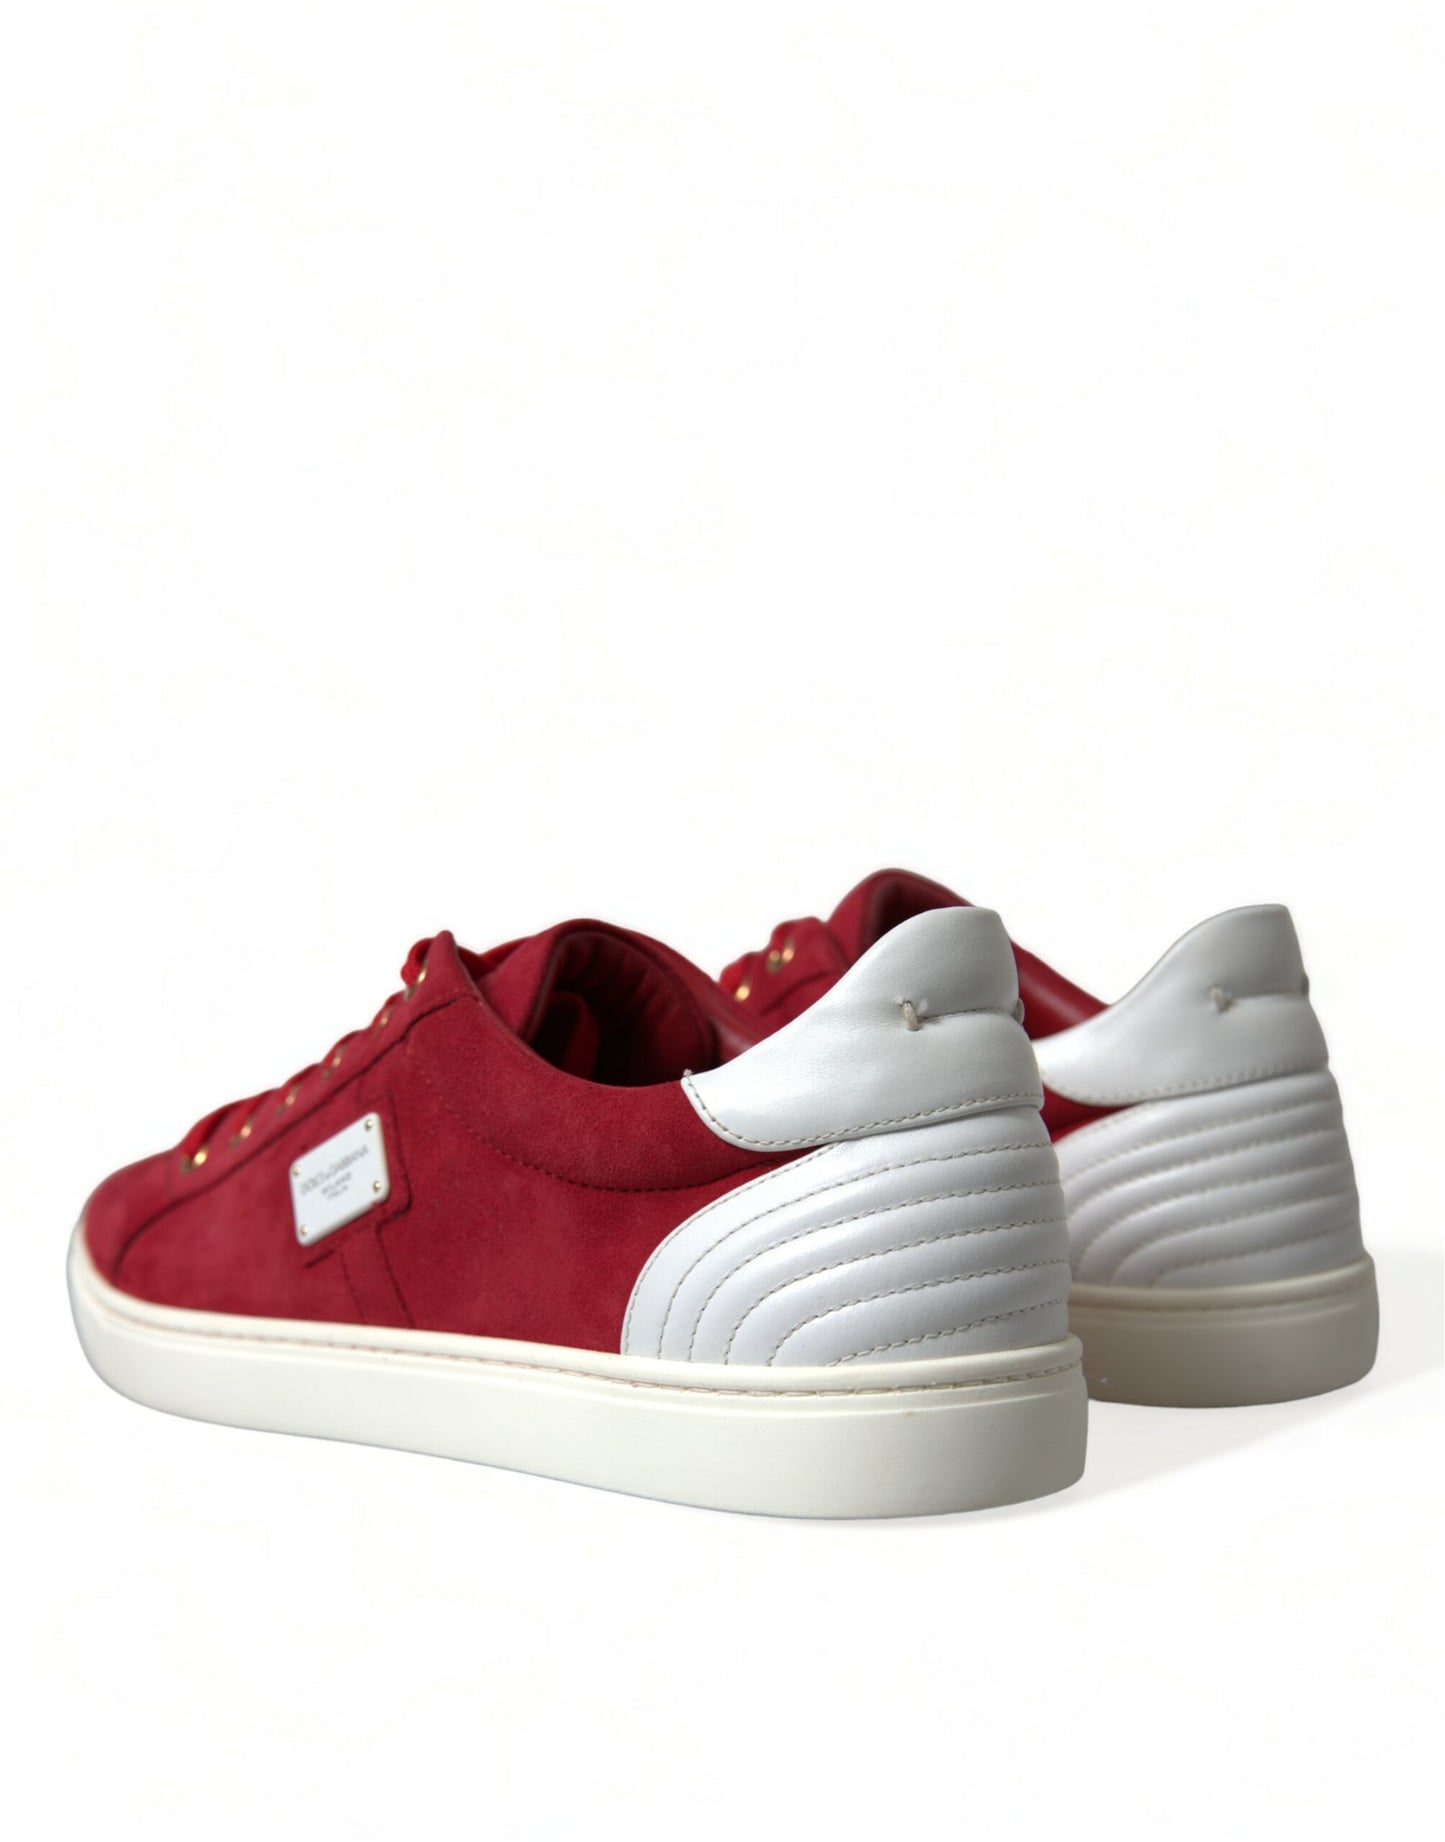 Dolce & Gabbana Elegant Red & White Low Top Sneakers